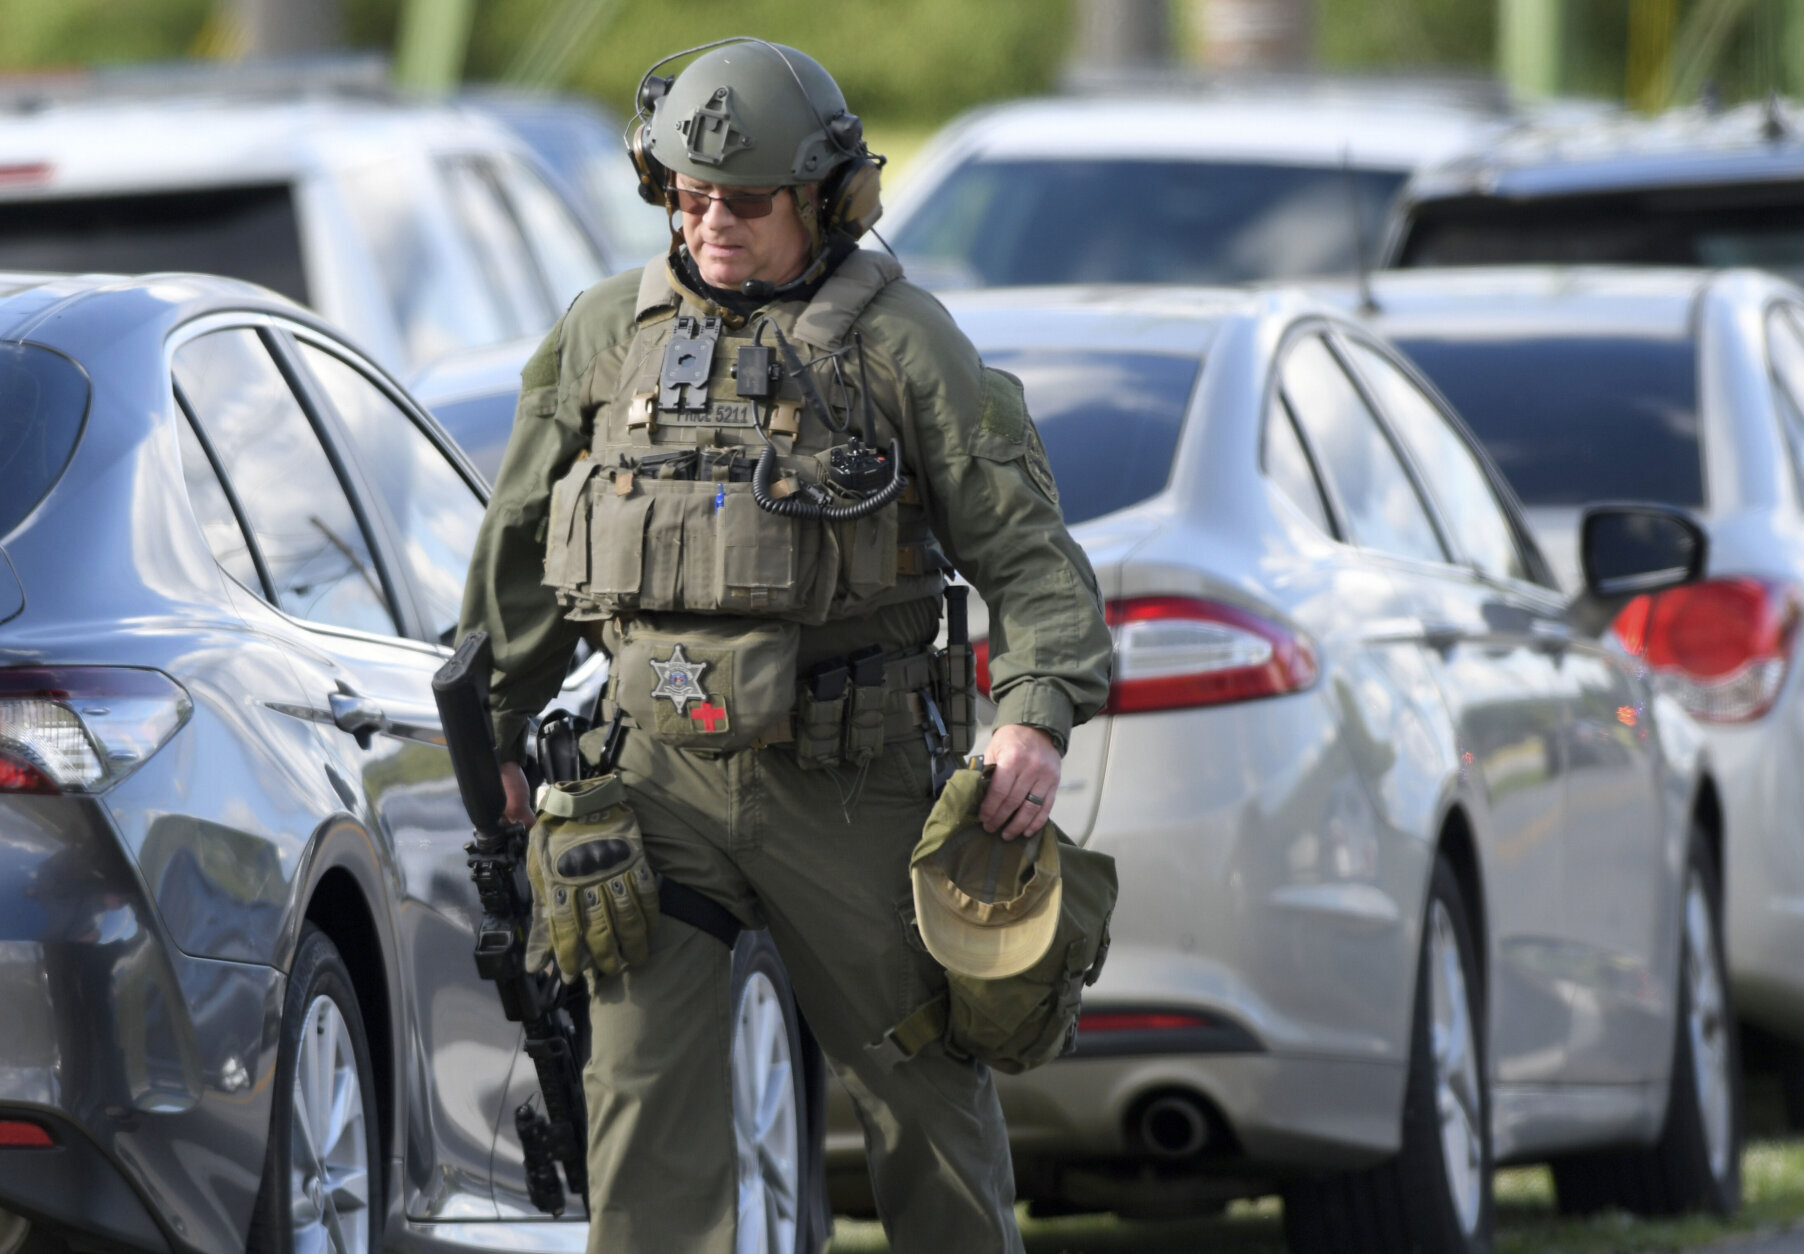 A tactical police officer walks near where a man opened fire at a business, killing three people before the suspect and a state trooper were wounded in a shootout, according to authorities, in Smithsburg, Md., Thursday, June 9, 2022. The Washington County (Md.) Sheriff's Office said in a news release that three victims were found dead at Columbia Machine Inc. and a fourth victim was critically injured.  (AP Photo/Steve Ruark)